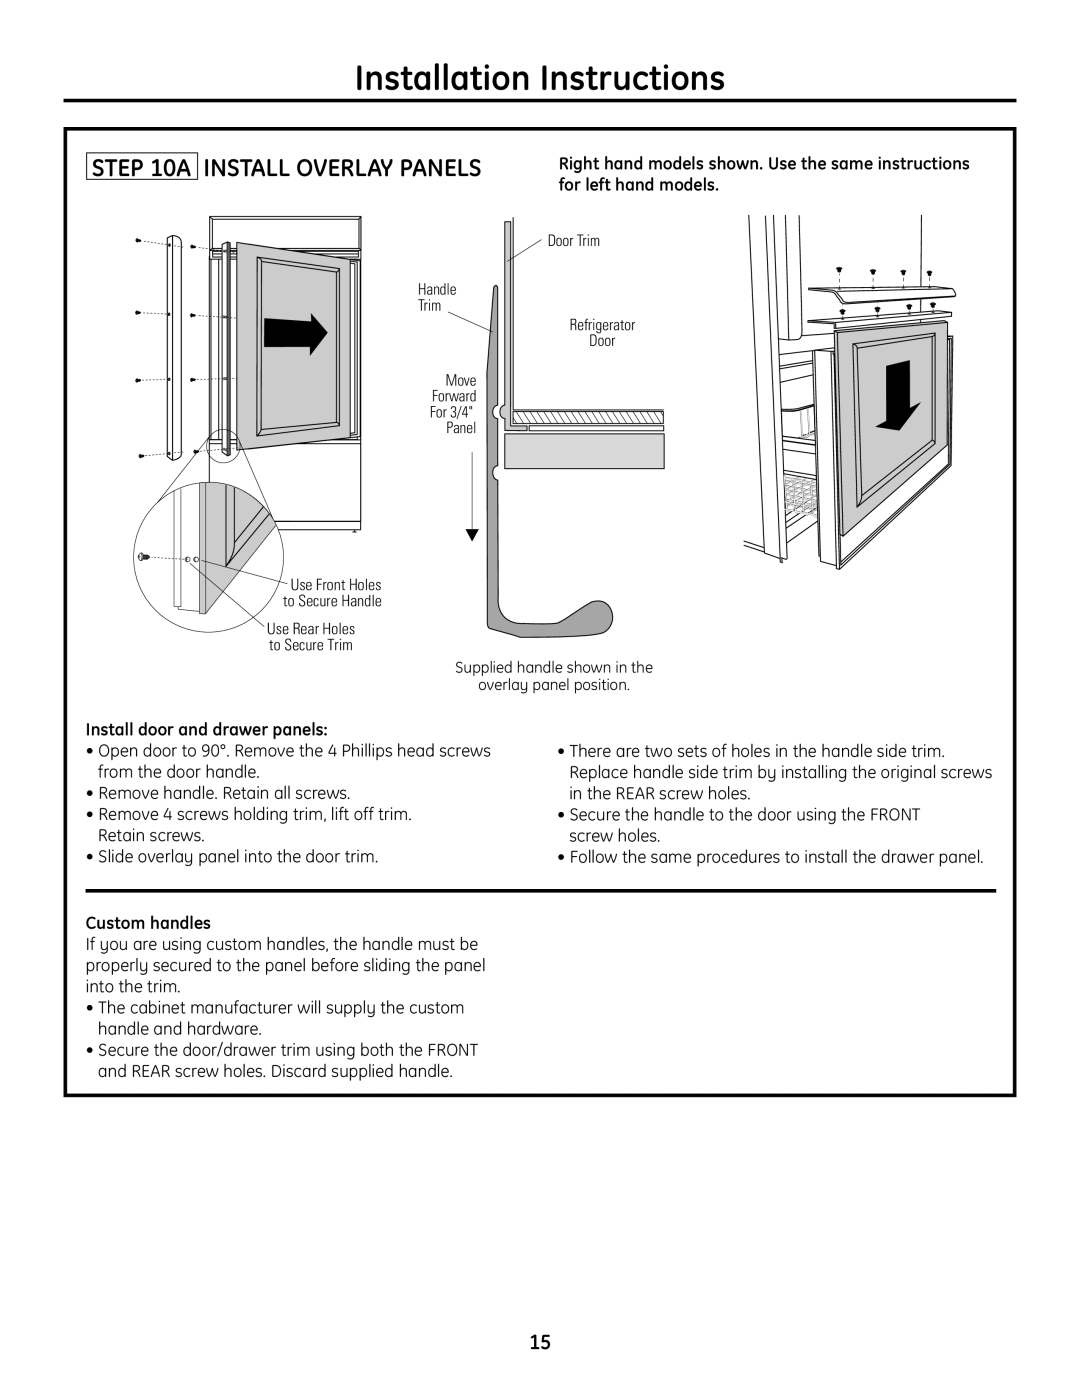 GE 49-60468-1 A Install Overlay Panels, Custom handles, Installation Instructions, Install door and drawer panels 